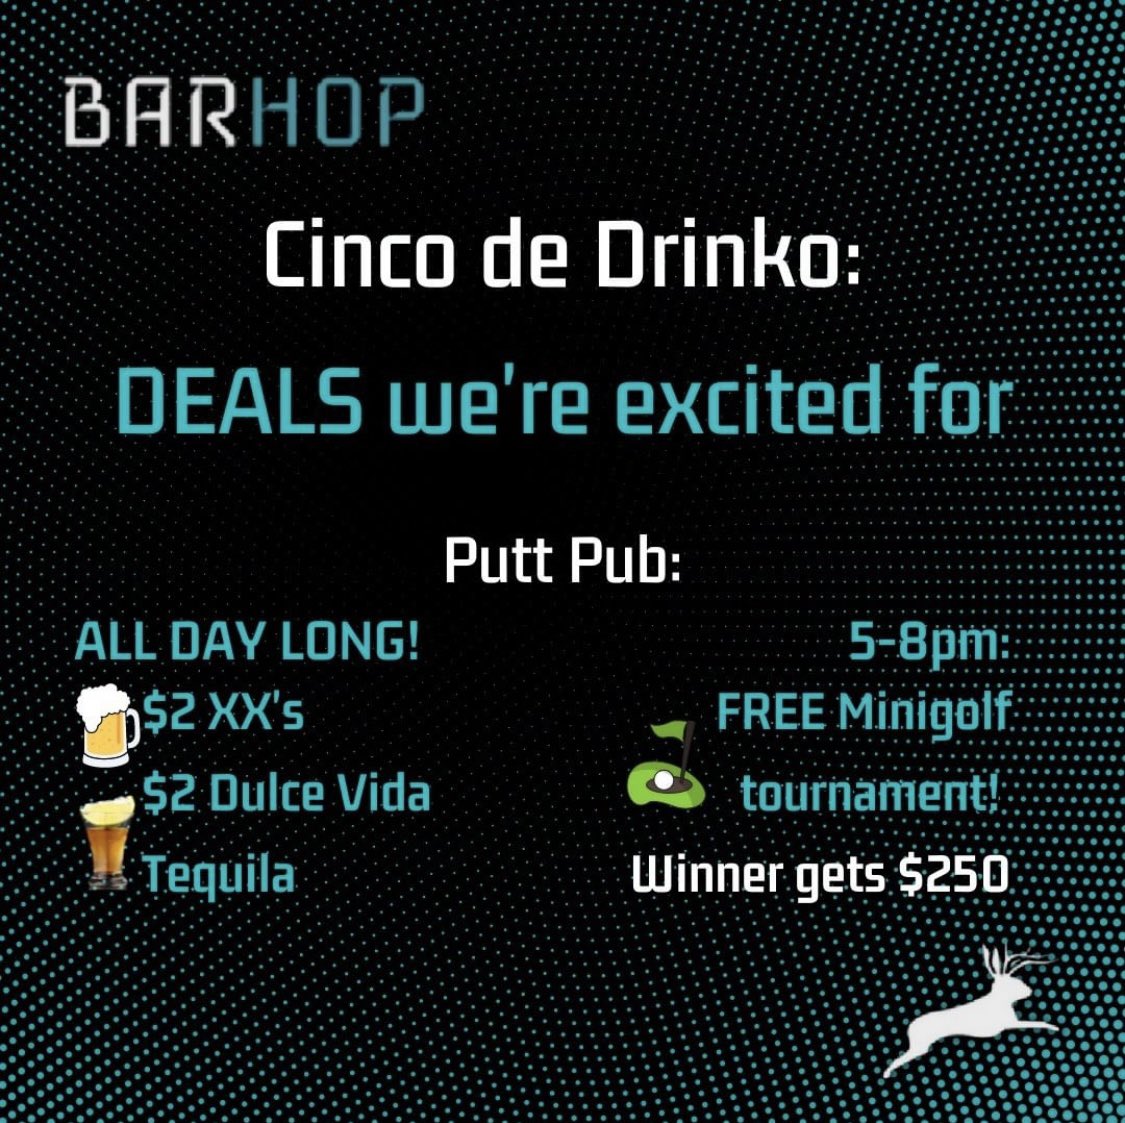 #CincodeDrinko is approaching 👀 Still looking for plans for the holiday dedicated to Tacos and Tequila?! We got you 🍻 These are some of the deals we’re most excited for in #SanMarcos this Thursday! #LinkUpDrinkUp #CincoDeMayo #smtx #txst